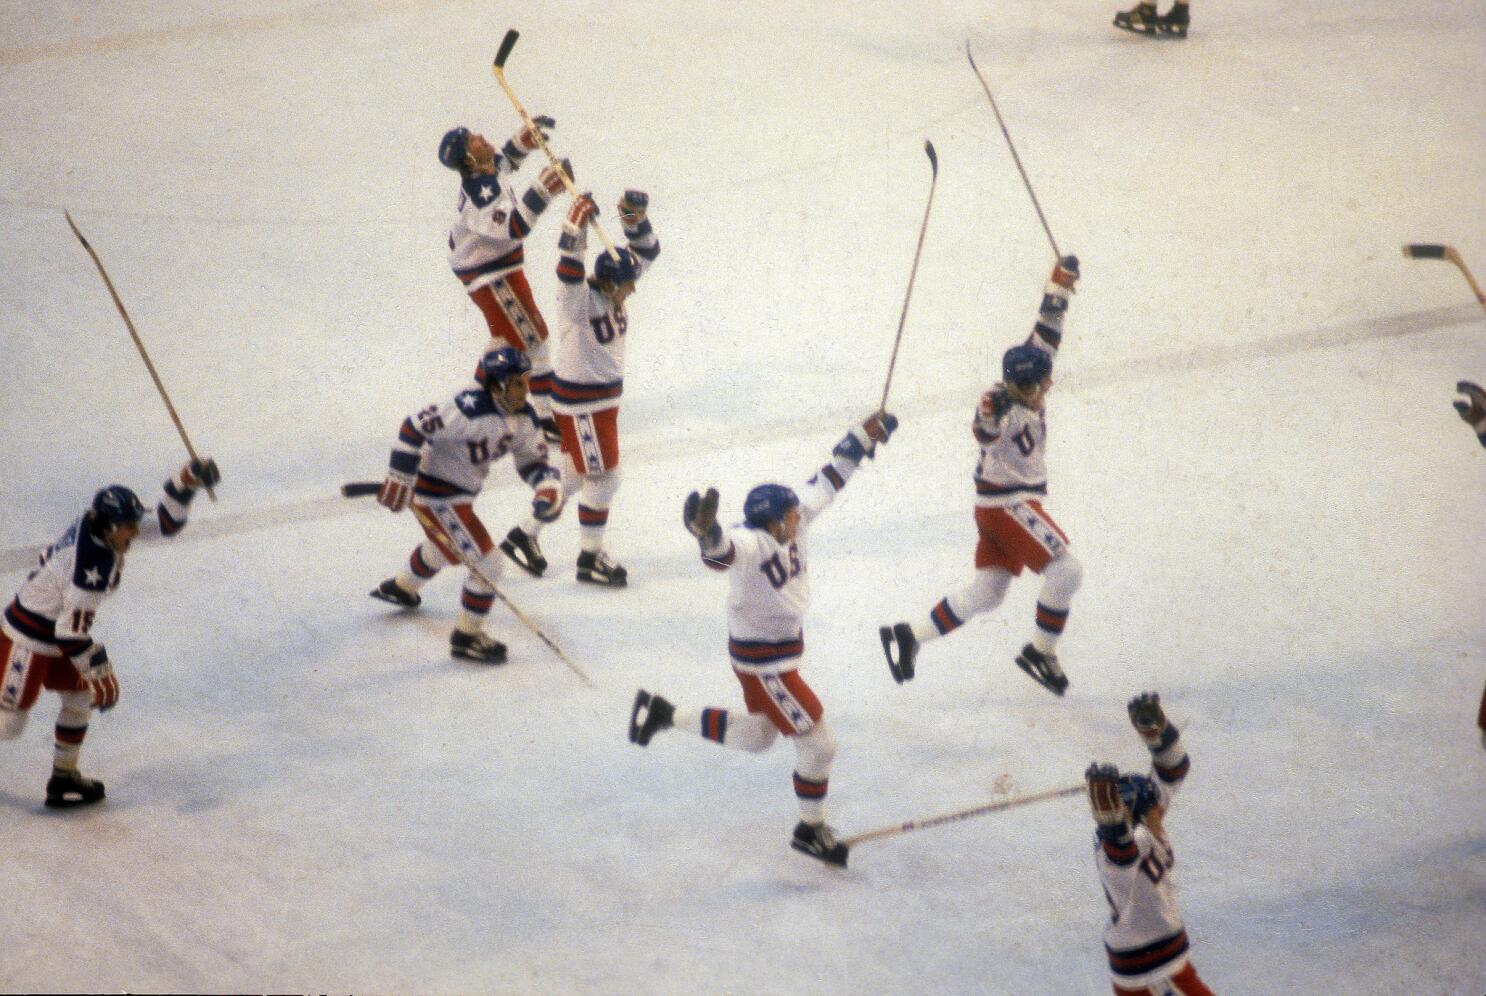 In Lake Placid and across the country, a miracle from 40 years ago